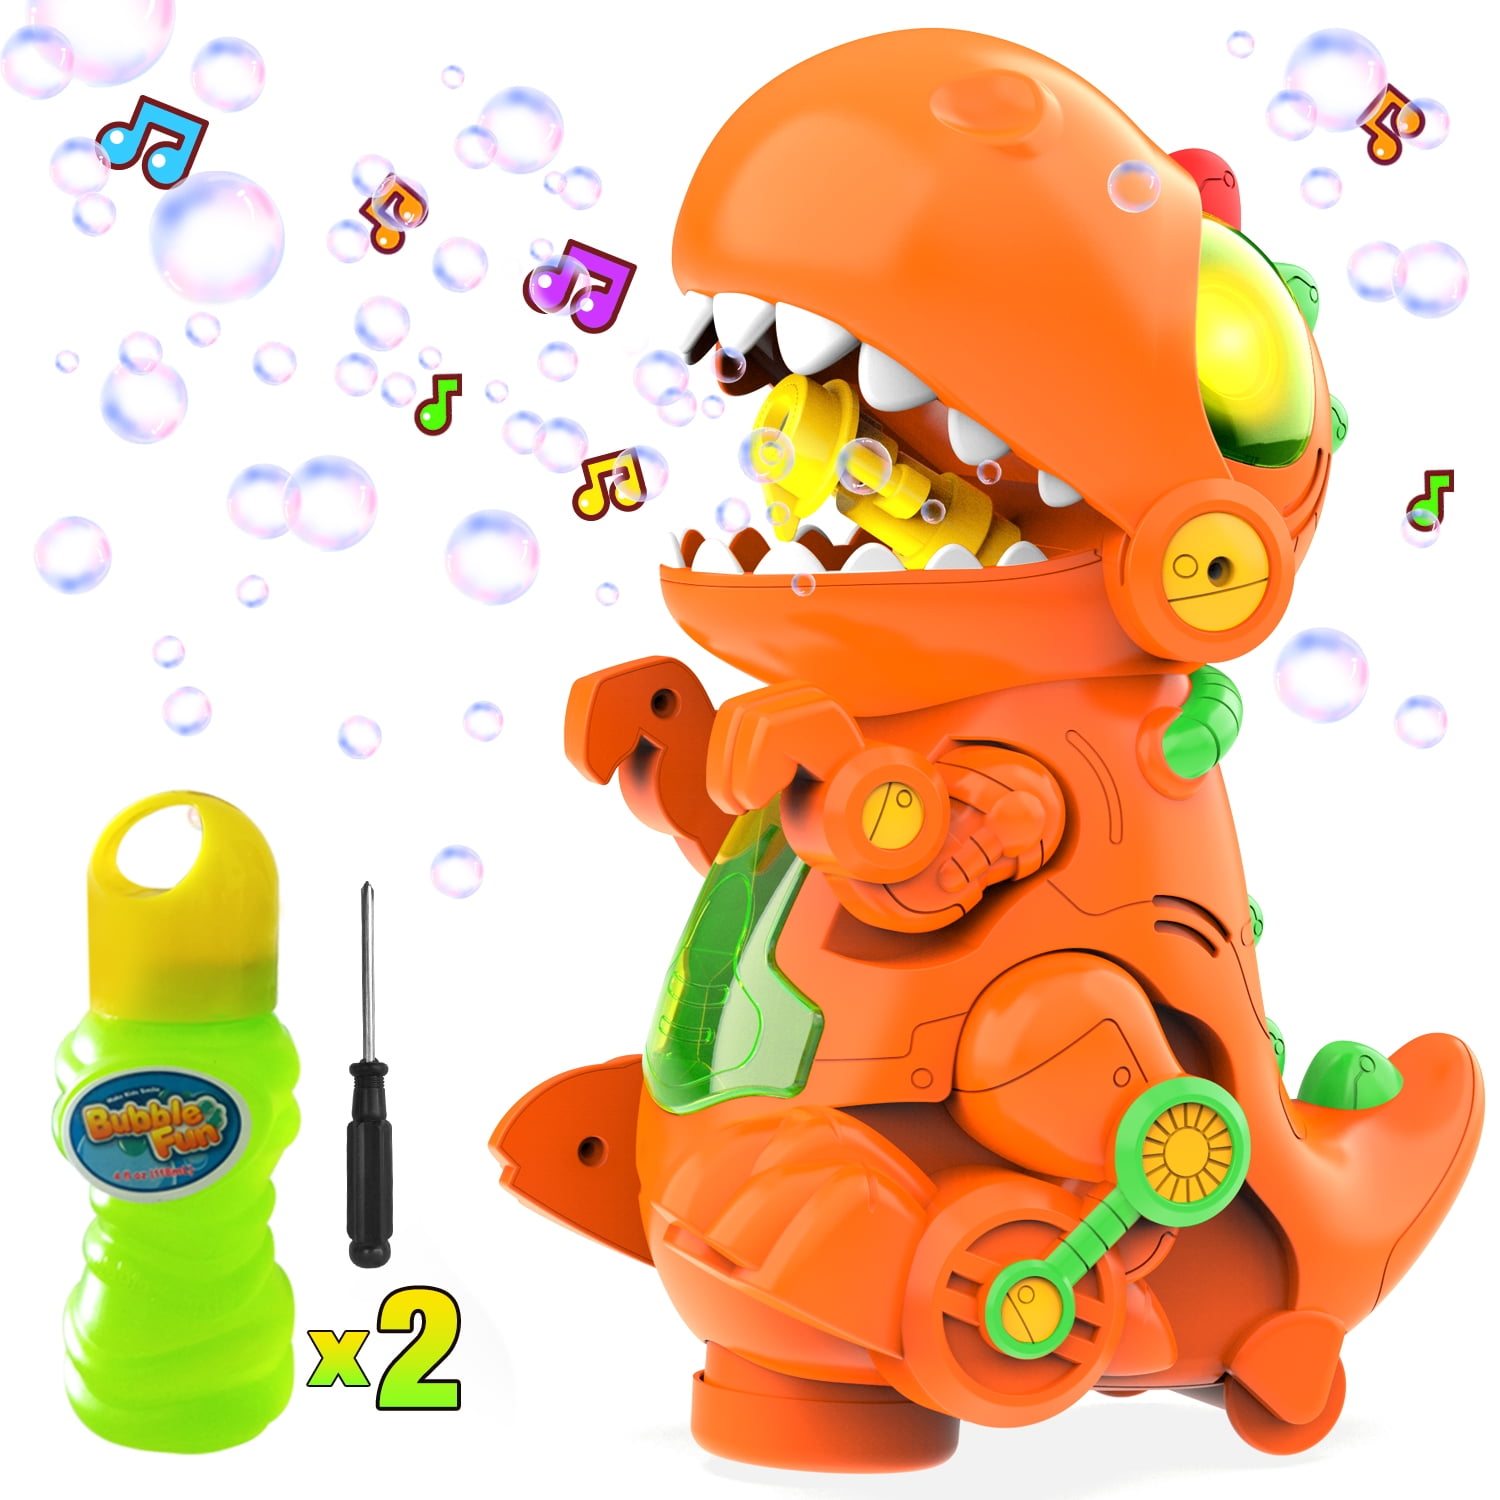 Bubble Machine for Toddlers Outdoor Birthday Parties Favors for Kids Automatic Bubble Blower for 2000+ Bubbles Per Minute Rechargeable Dinosaur Bubble Maker with 8OZ Bubble Solutions 